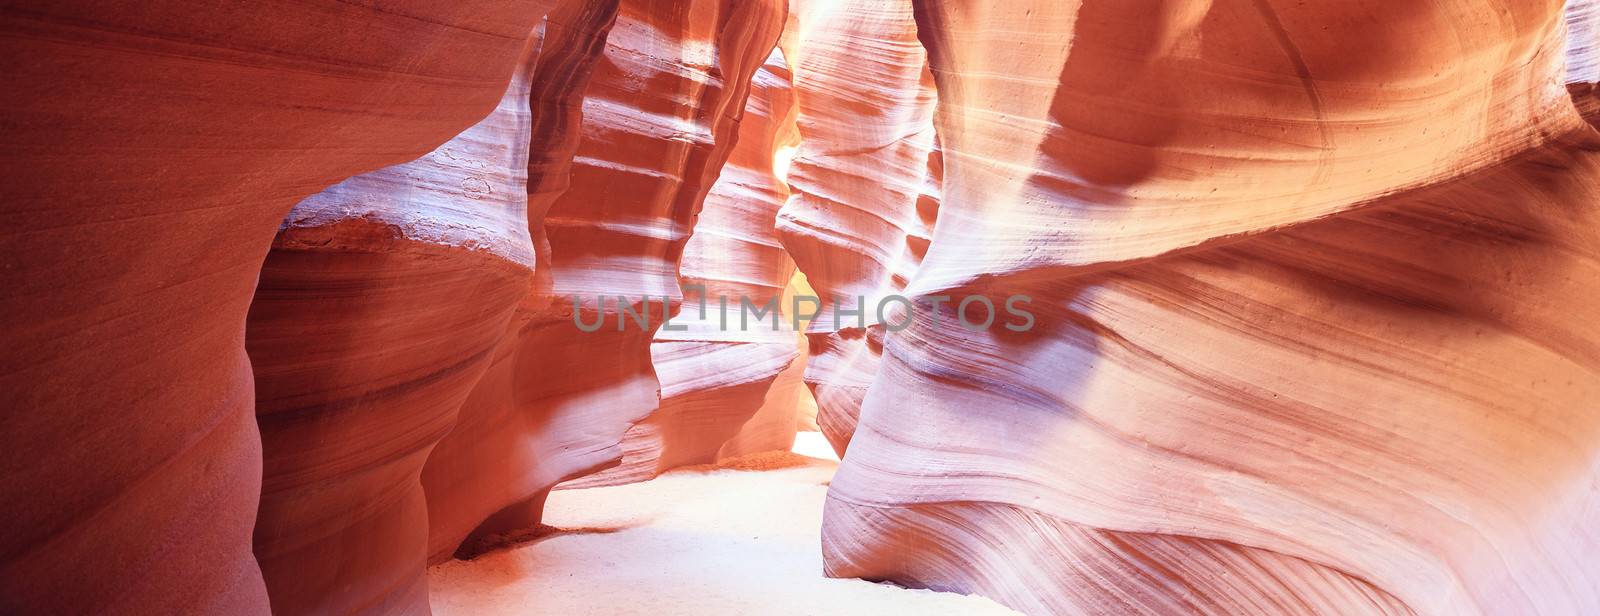 Panoramic view in the famous Antelope Canyon by vwalakte